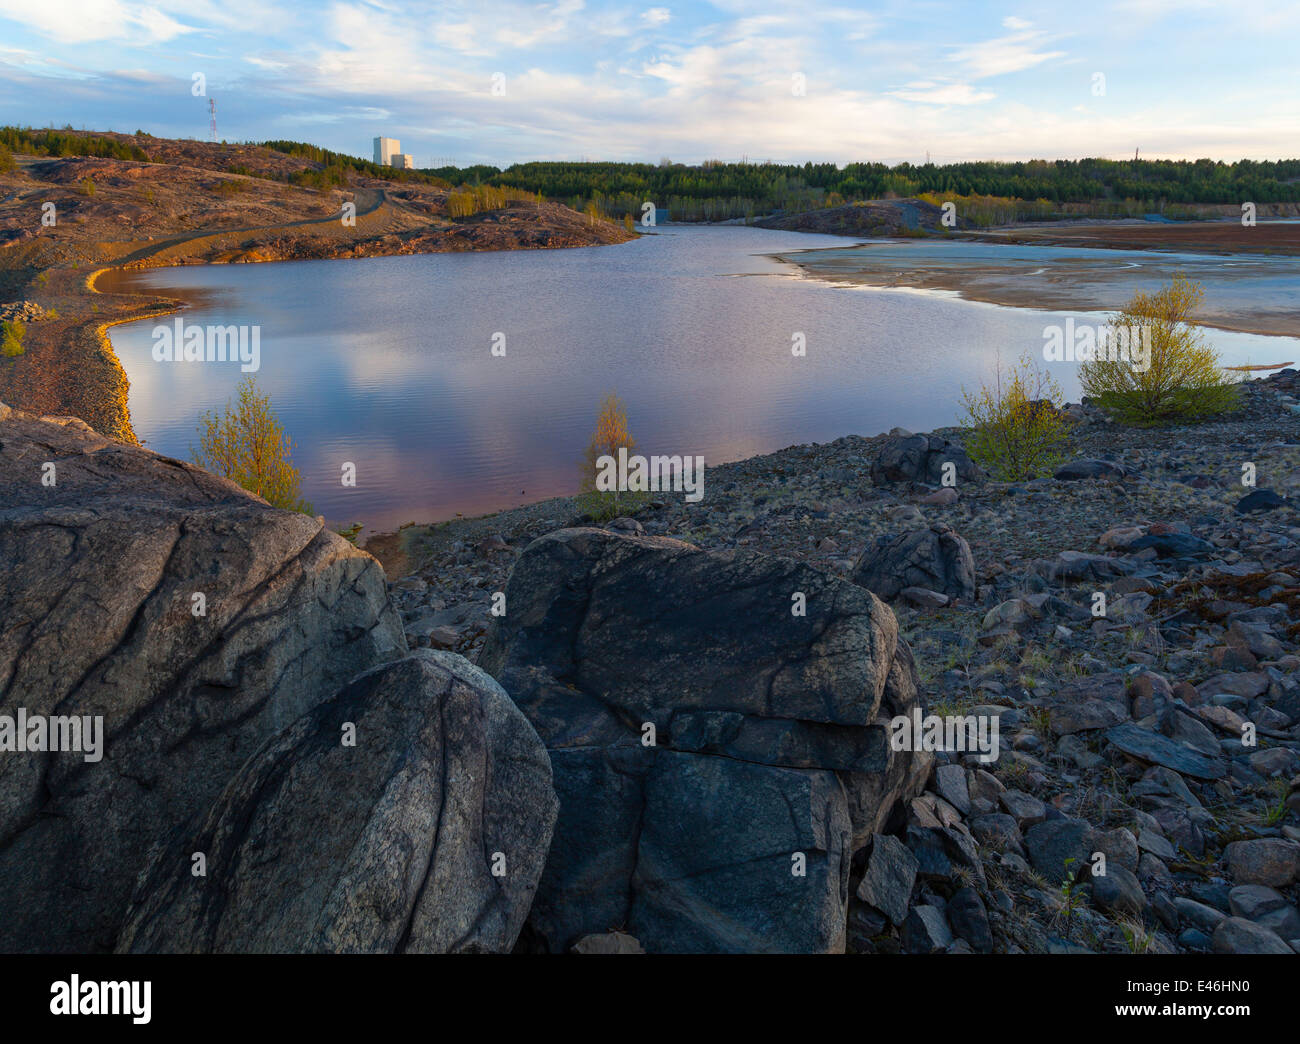 Large rocks on a hillside overlooking a tailings pond in Sudbury near the Vale Mining operations. Sudbury, Ontario, Canada. Stock Photo